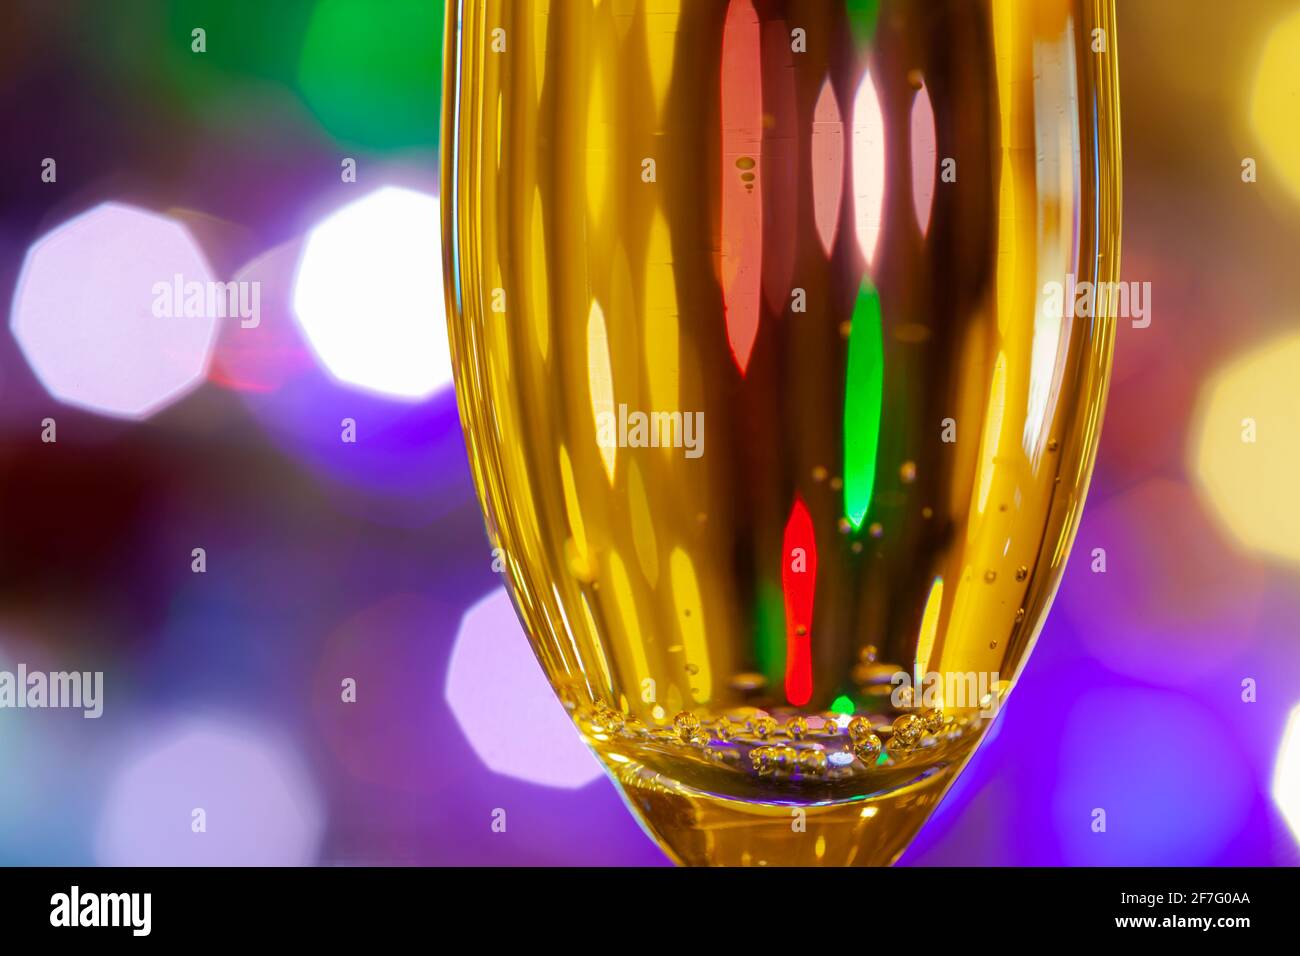 glass of champagne close-up against the background of the New Year's garland with blurry background, used as a background or texture, soft focus Stock Photo